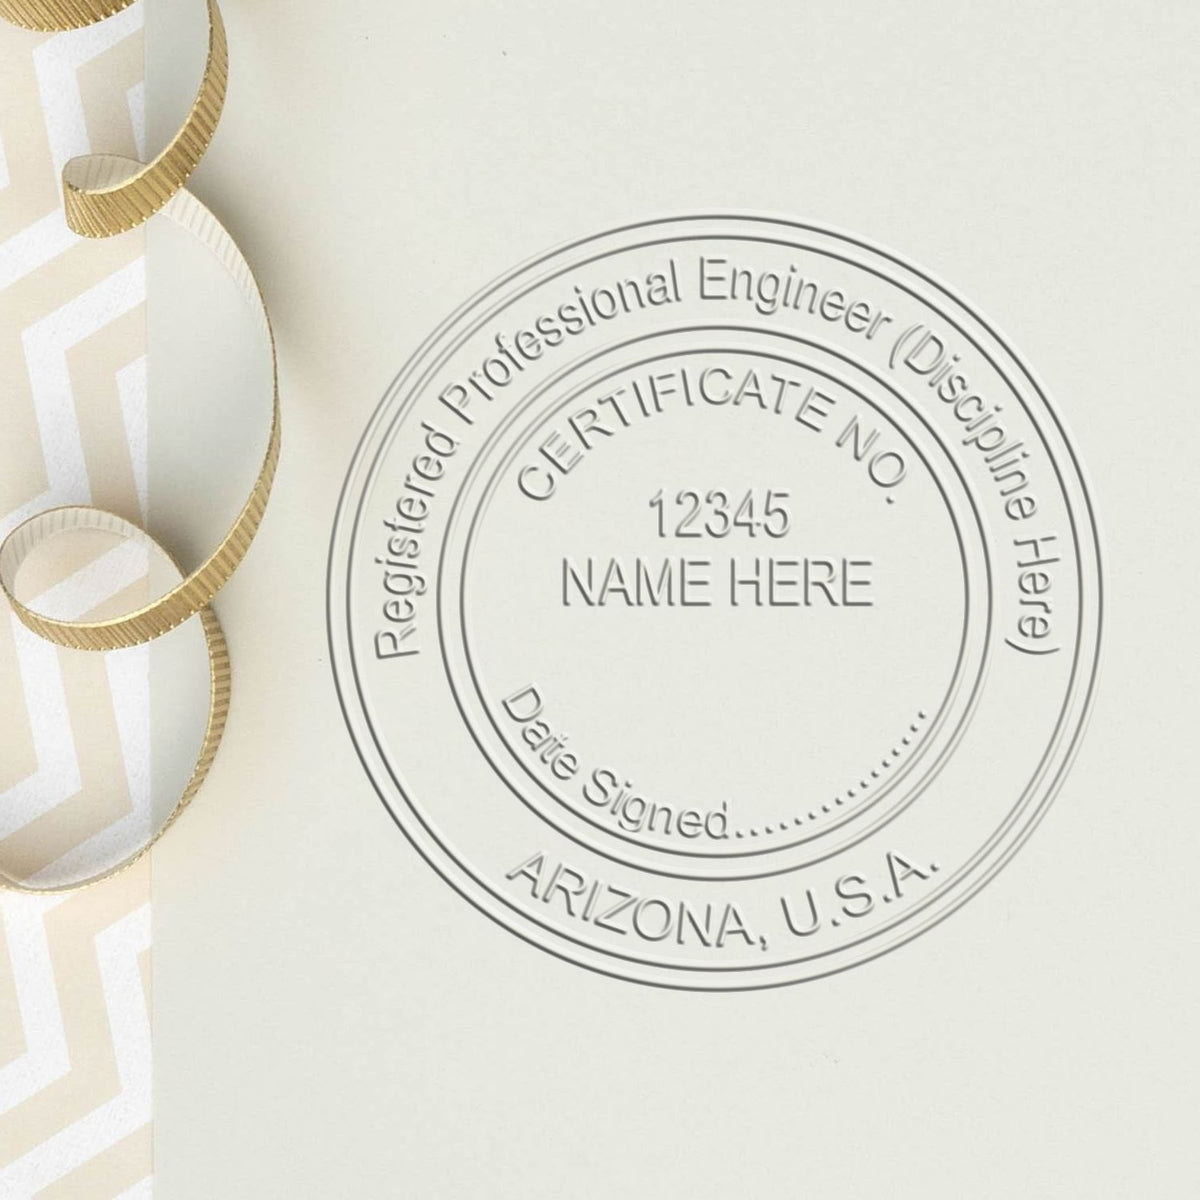 An in use photo of the Hybrid Arizona Engineer Seal showing a sample imprint on a cardstock